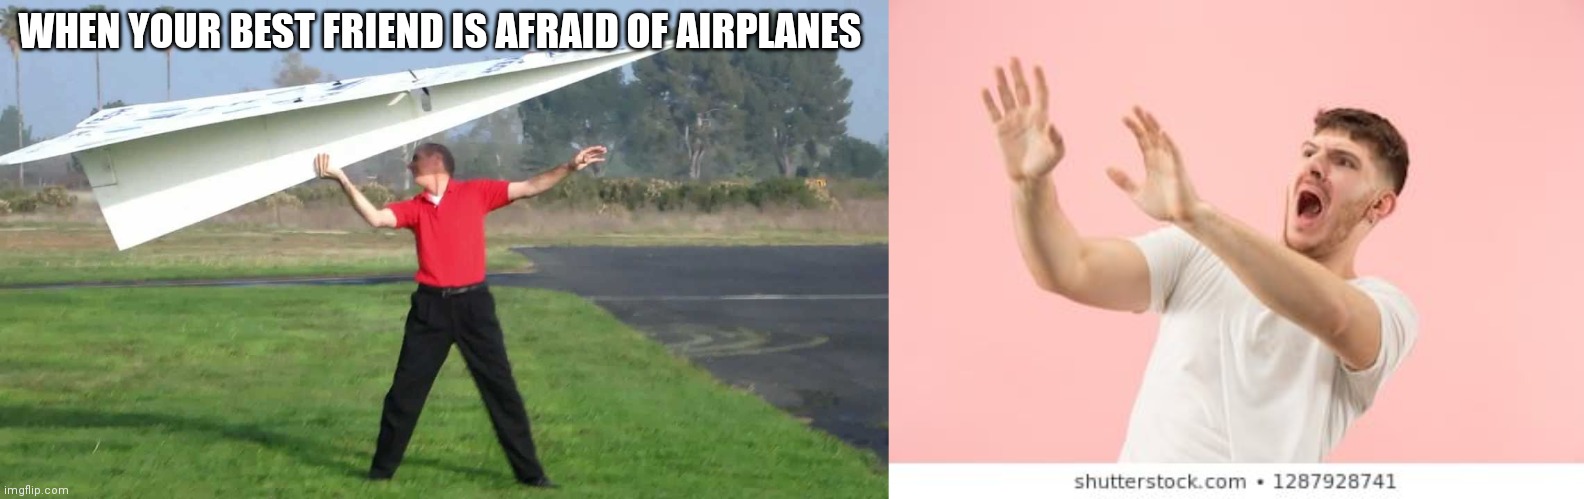 Afraid of planes | WHEN YOUR BEST FRIEND IS AFRAID OF AIRPLANES | image tagged in airplanes | made w/ Imgflip meme maker